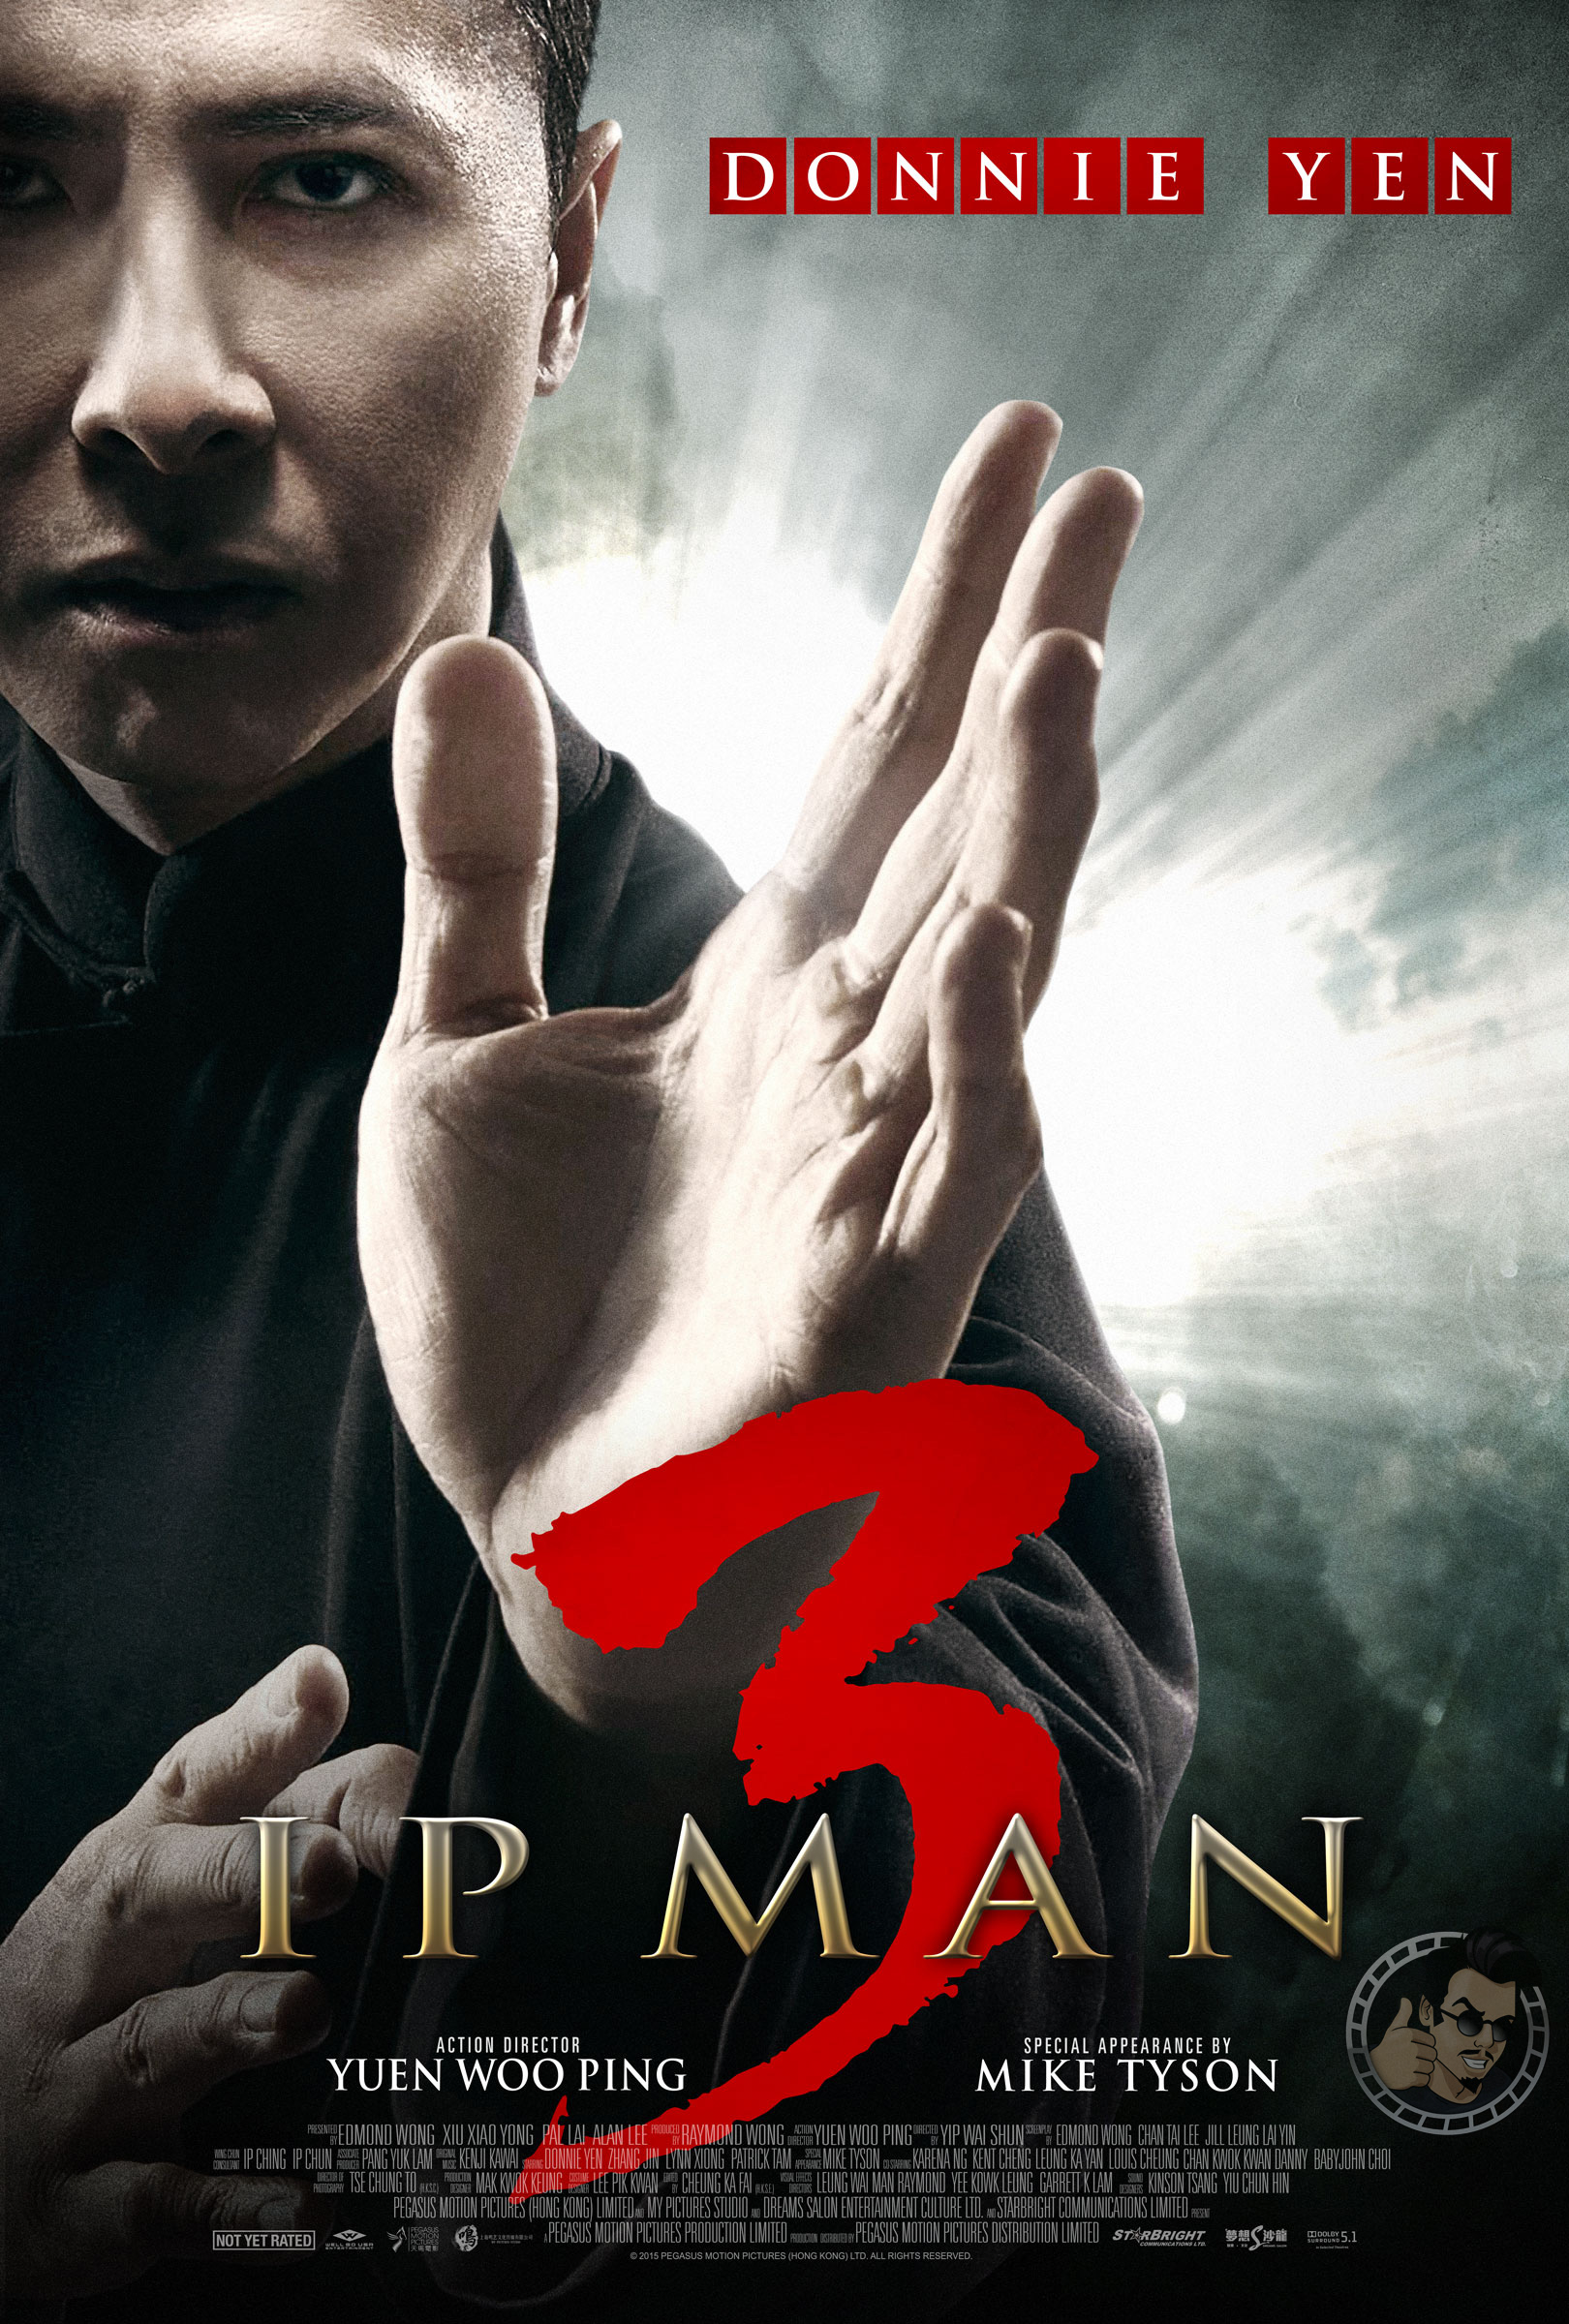 All Movie Posters and Prints for Ip Man 3 | JoBlo Posters